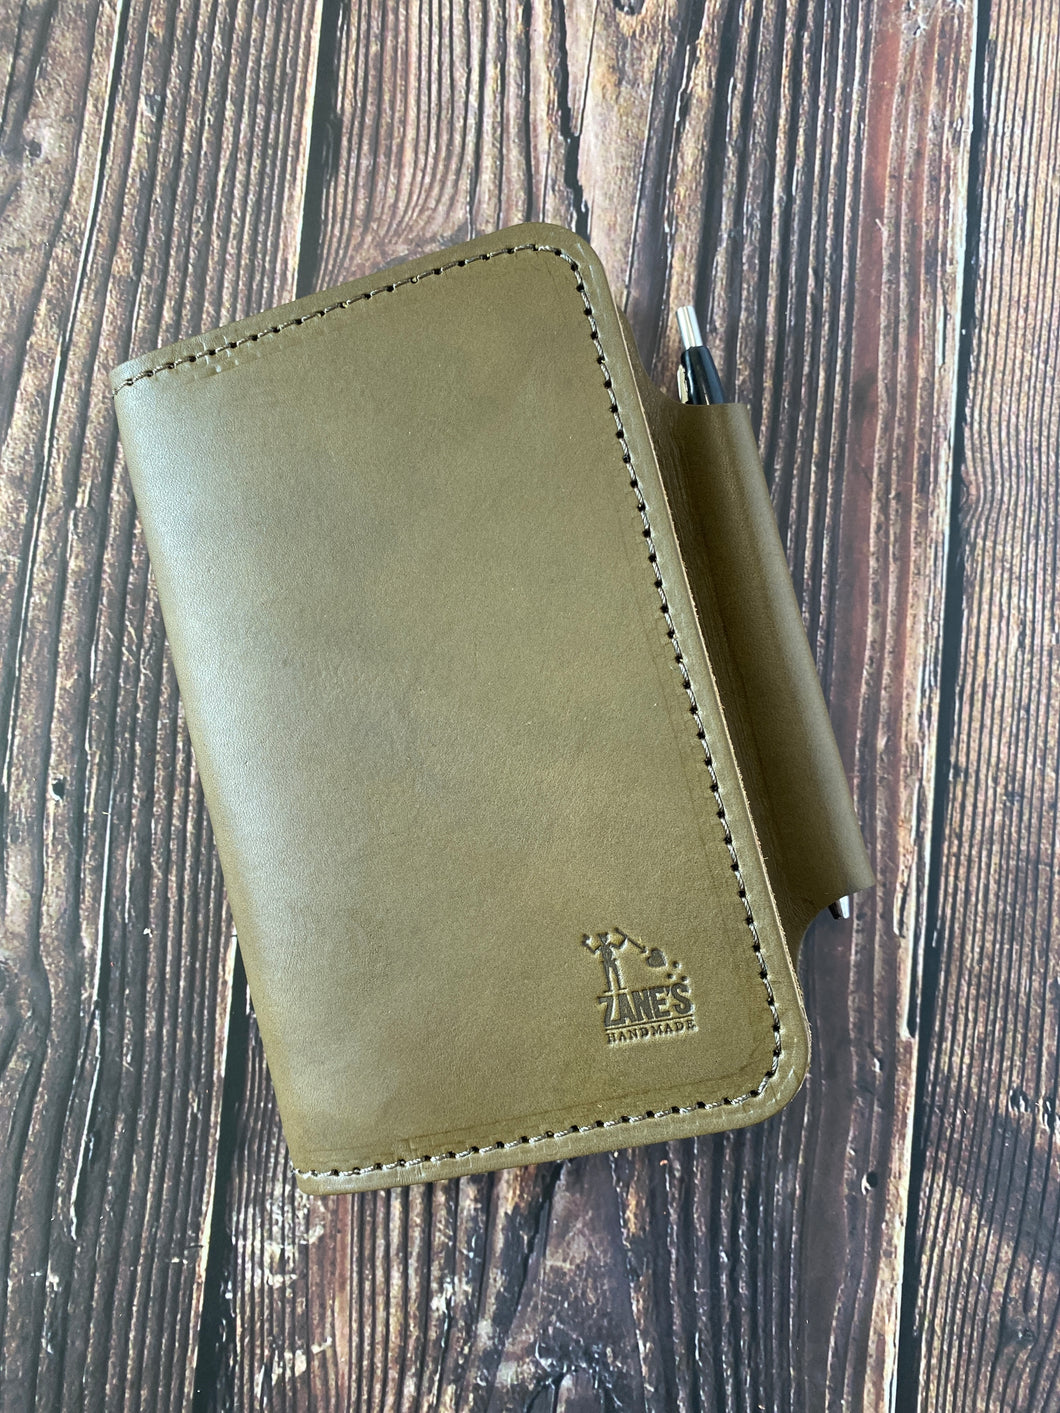 Deluxe Notebook Cover - Wickett & Craig Bridle